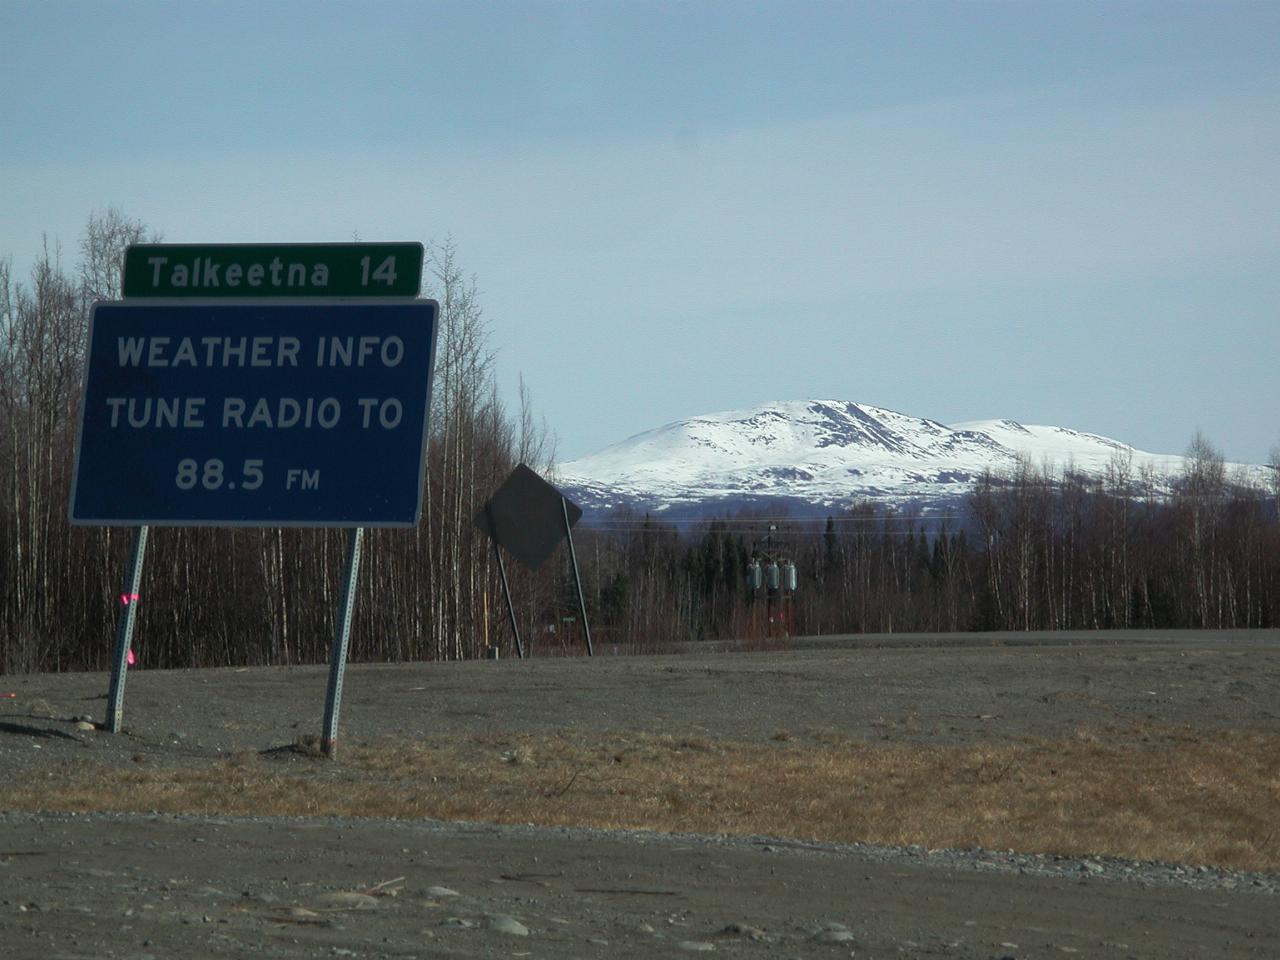 More snow covered hills at Talkeetna turnoff on Highway 3